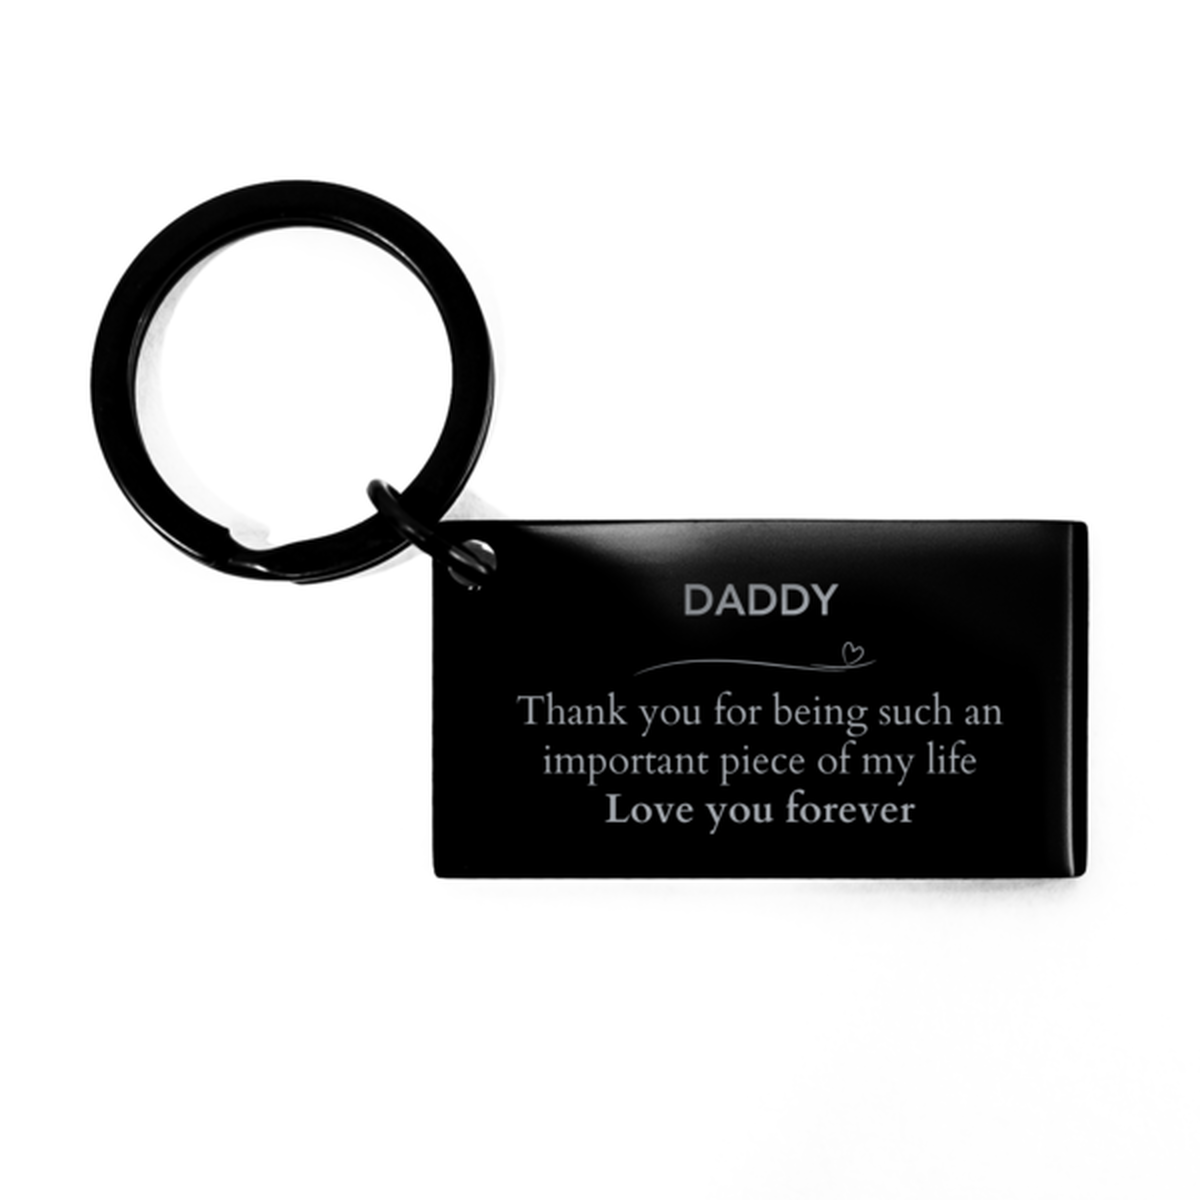 Appropriate Daddy Keychain Epic Birthday Gifts for Daddy Thank you for being such an important piece of my life Daddy Christmas Mothers Fathers Day